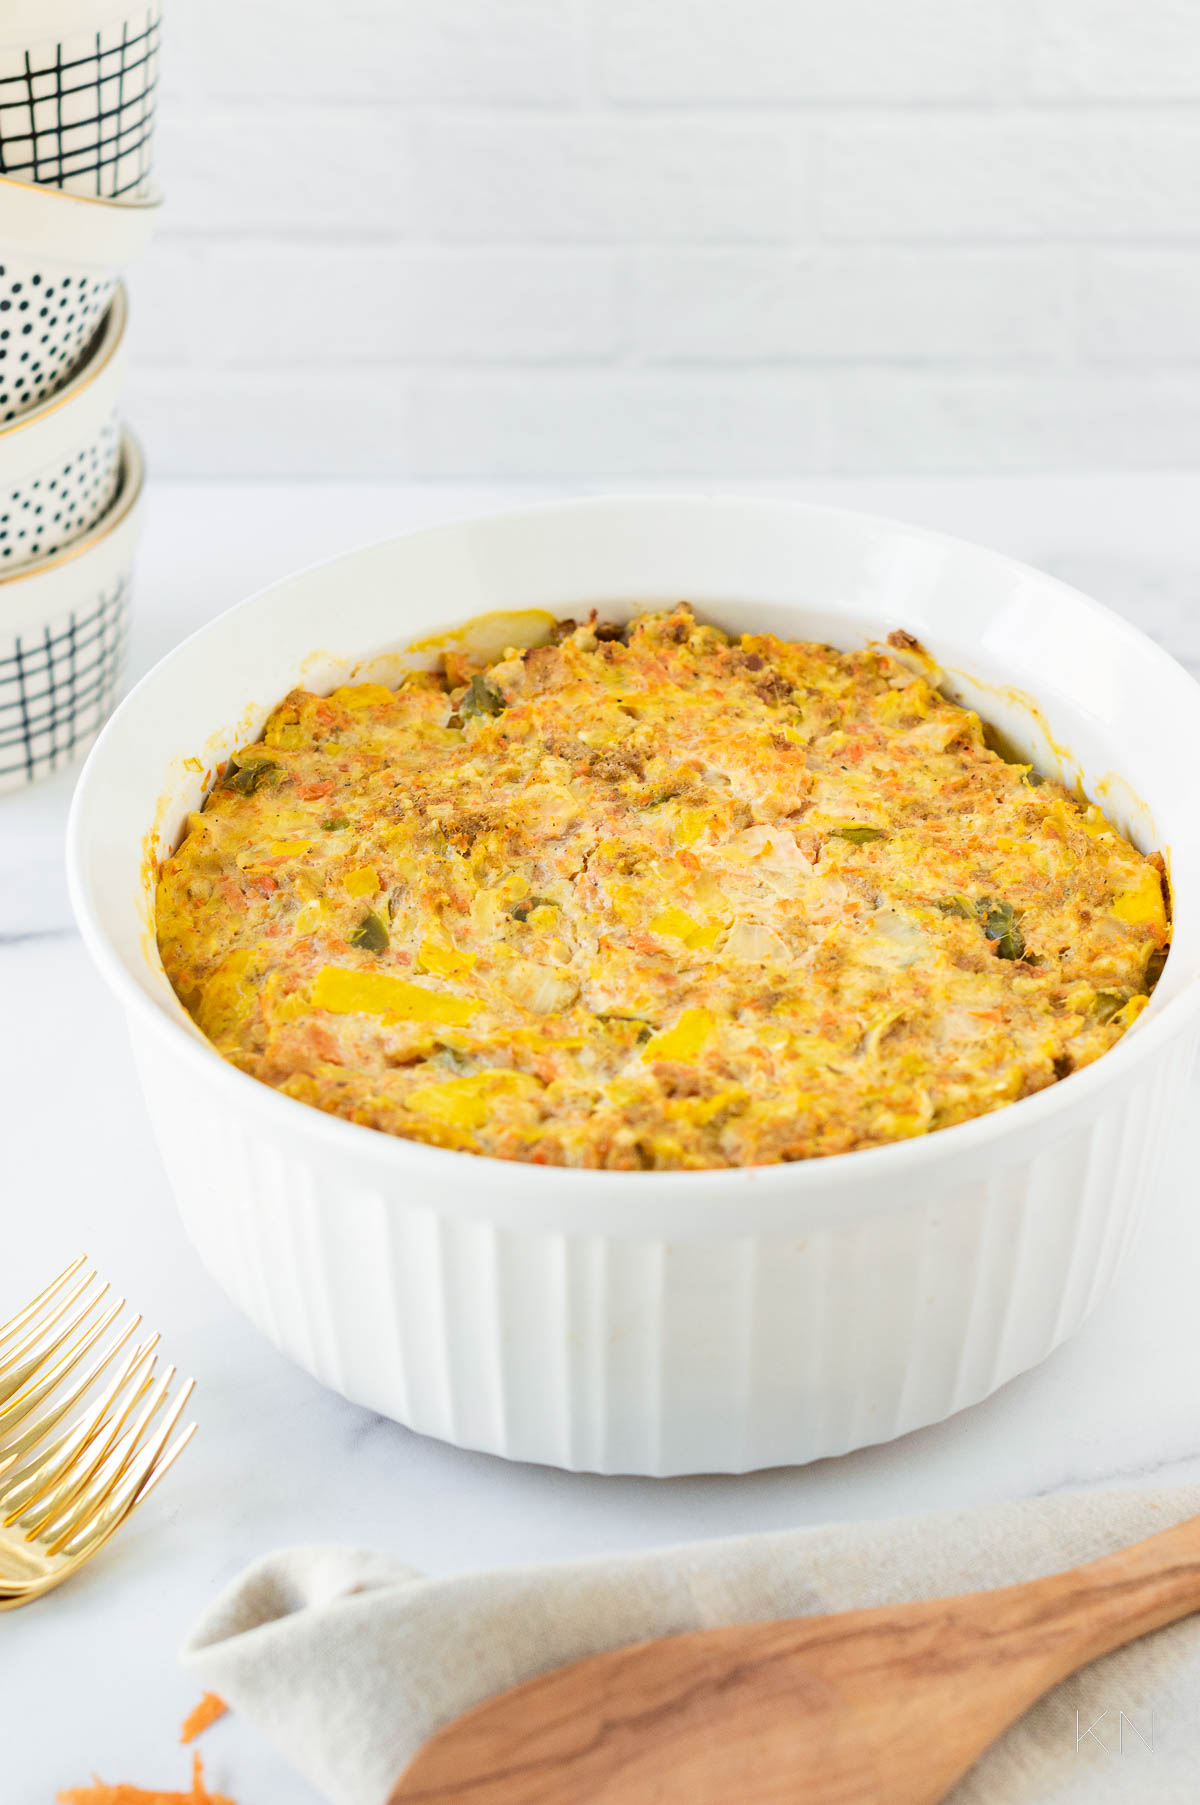 How to Make Yellow Squash Casserole as a Dinner Side